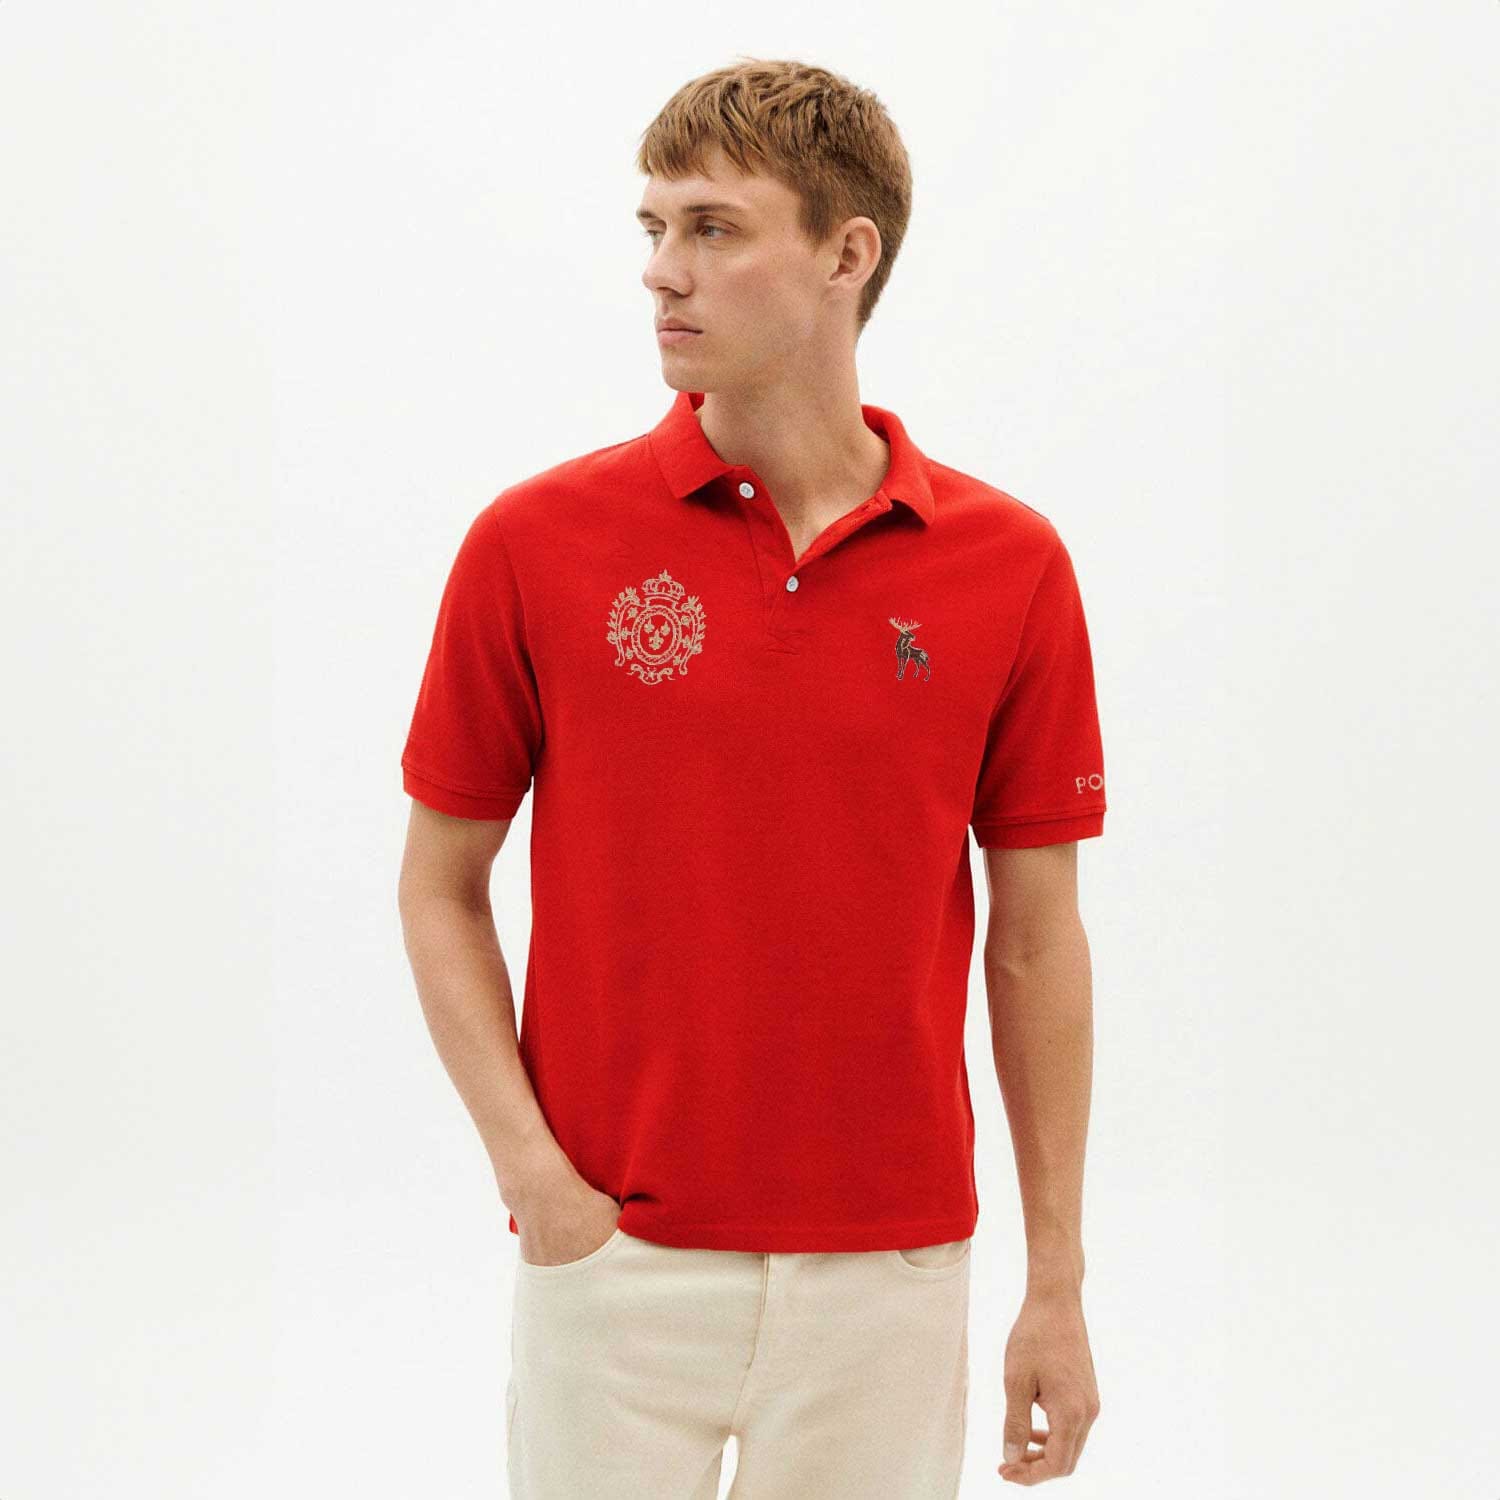 Polo Republica Men's Moose & Crest Embroidered Short Sleeve Polo Shirt Men's Polo Shirt Polo Republica Red S 